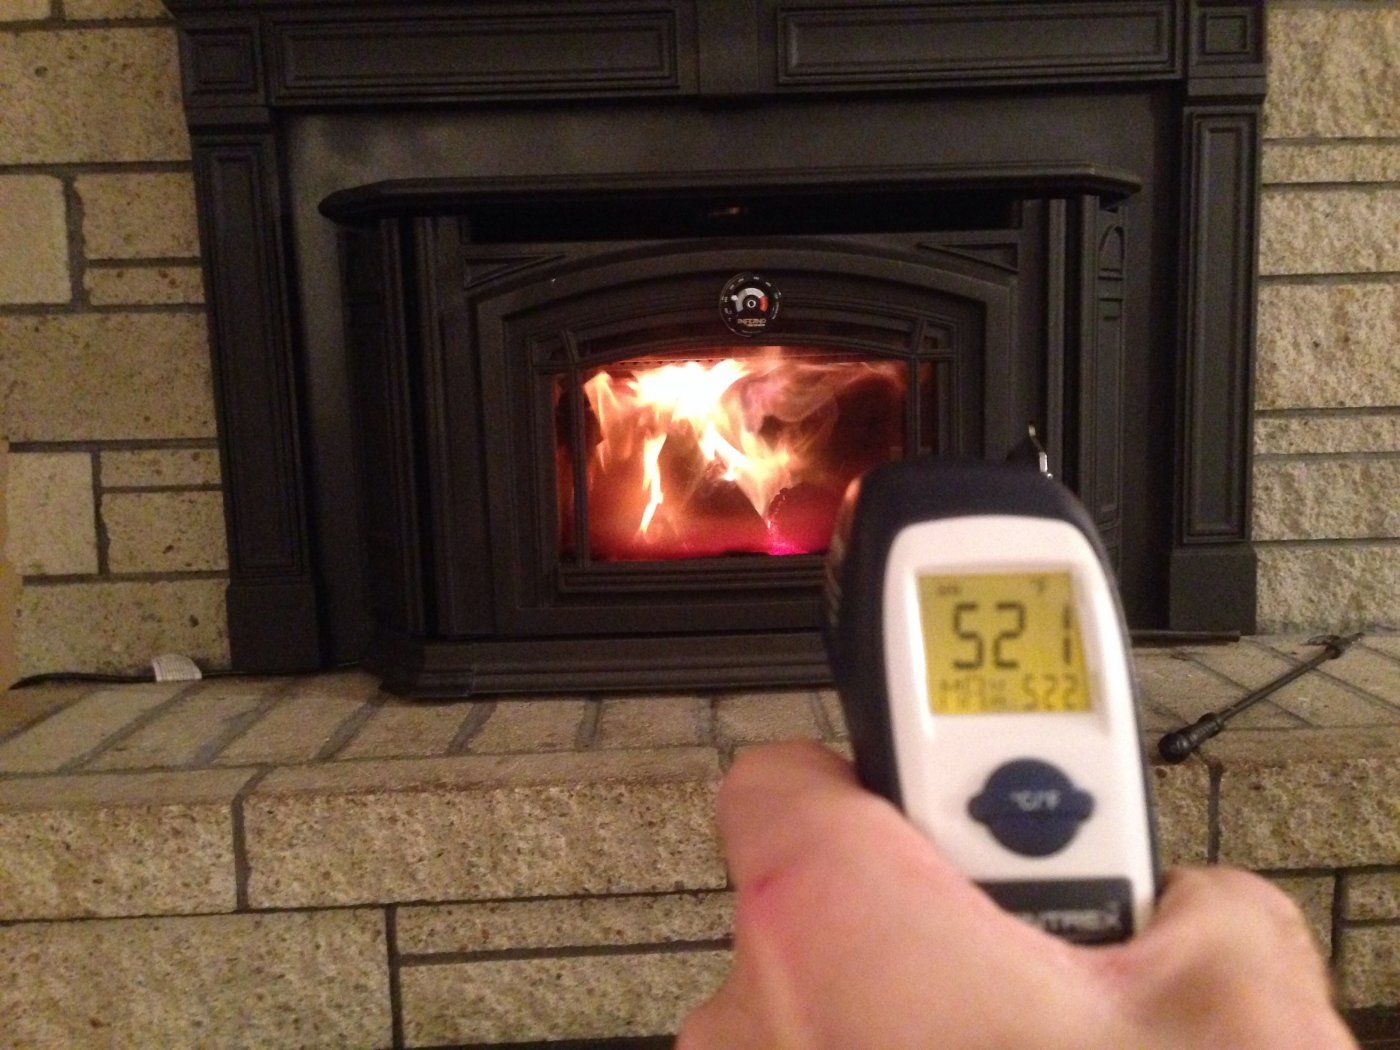 Fireplace Stove Thermometer, Thermometer Wood Stove